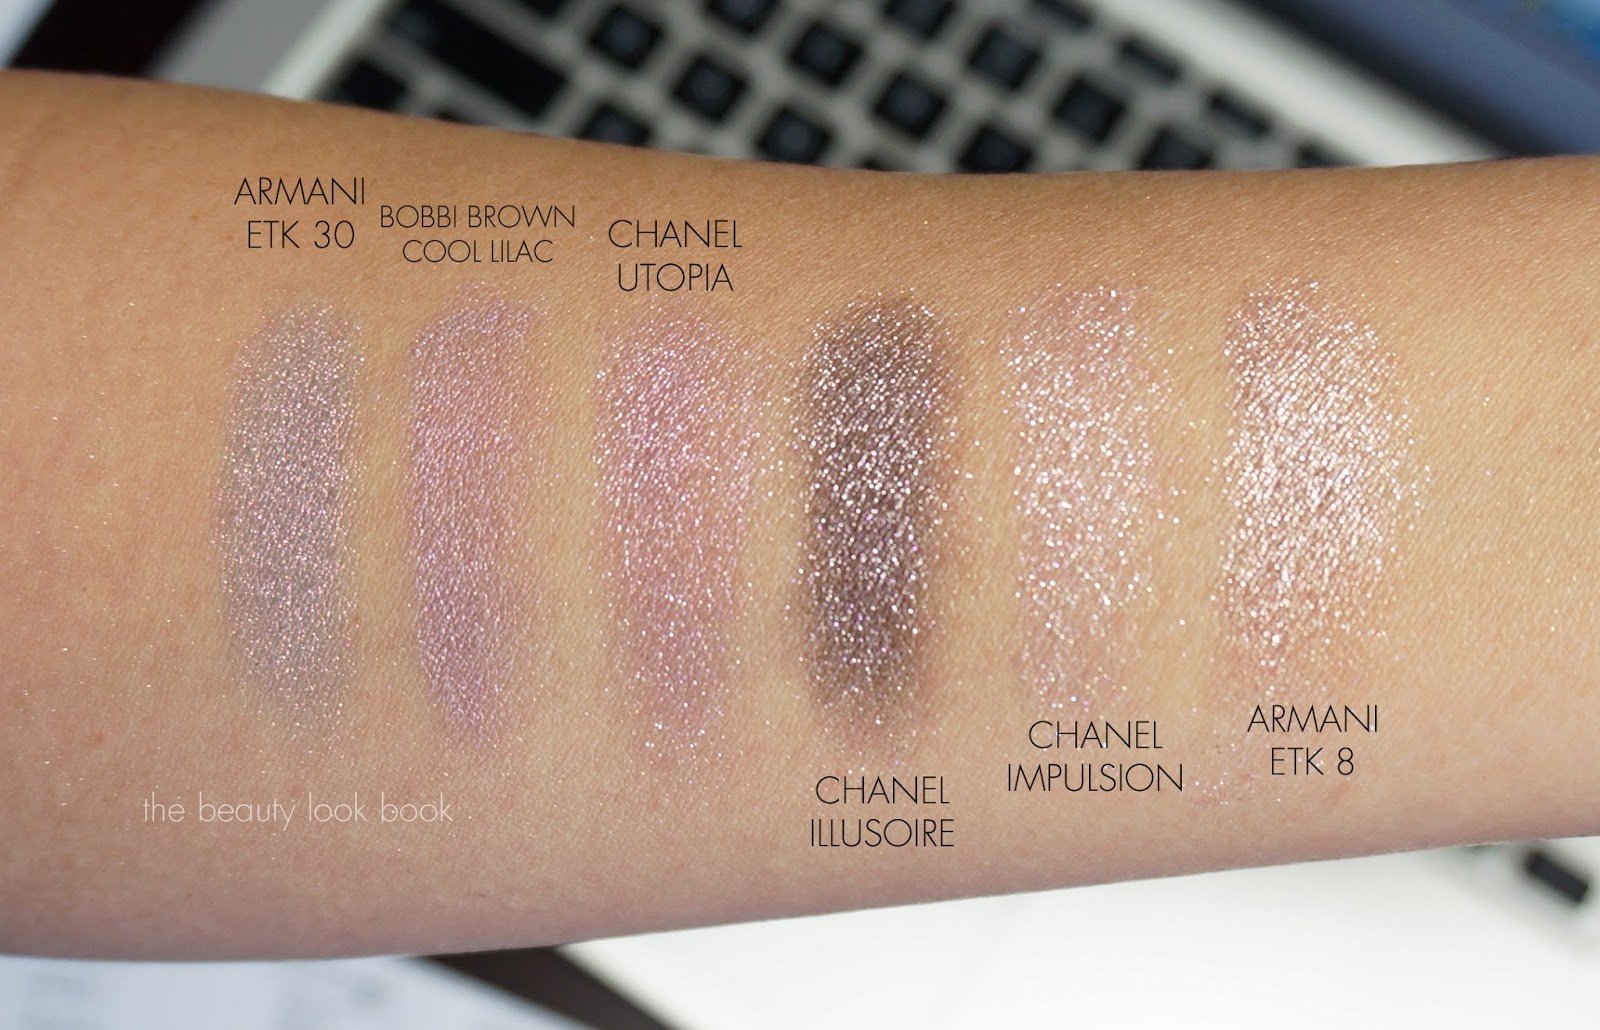 Chanel Illusion D'Ombre Mirage, New Moon and Utopia - The Beauty Look Book